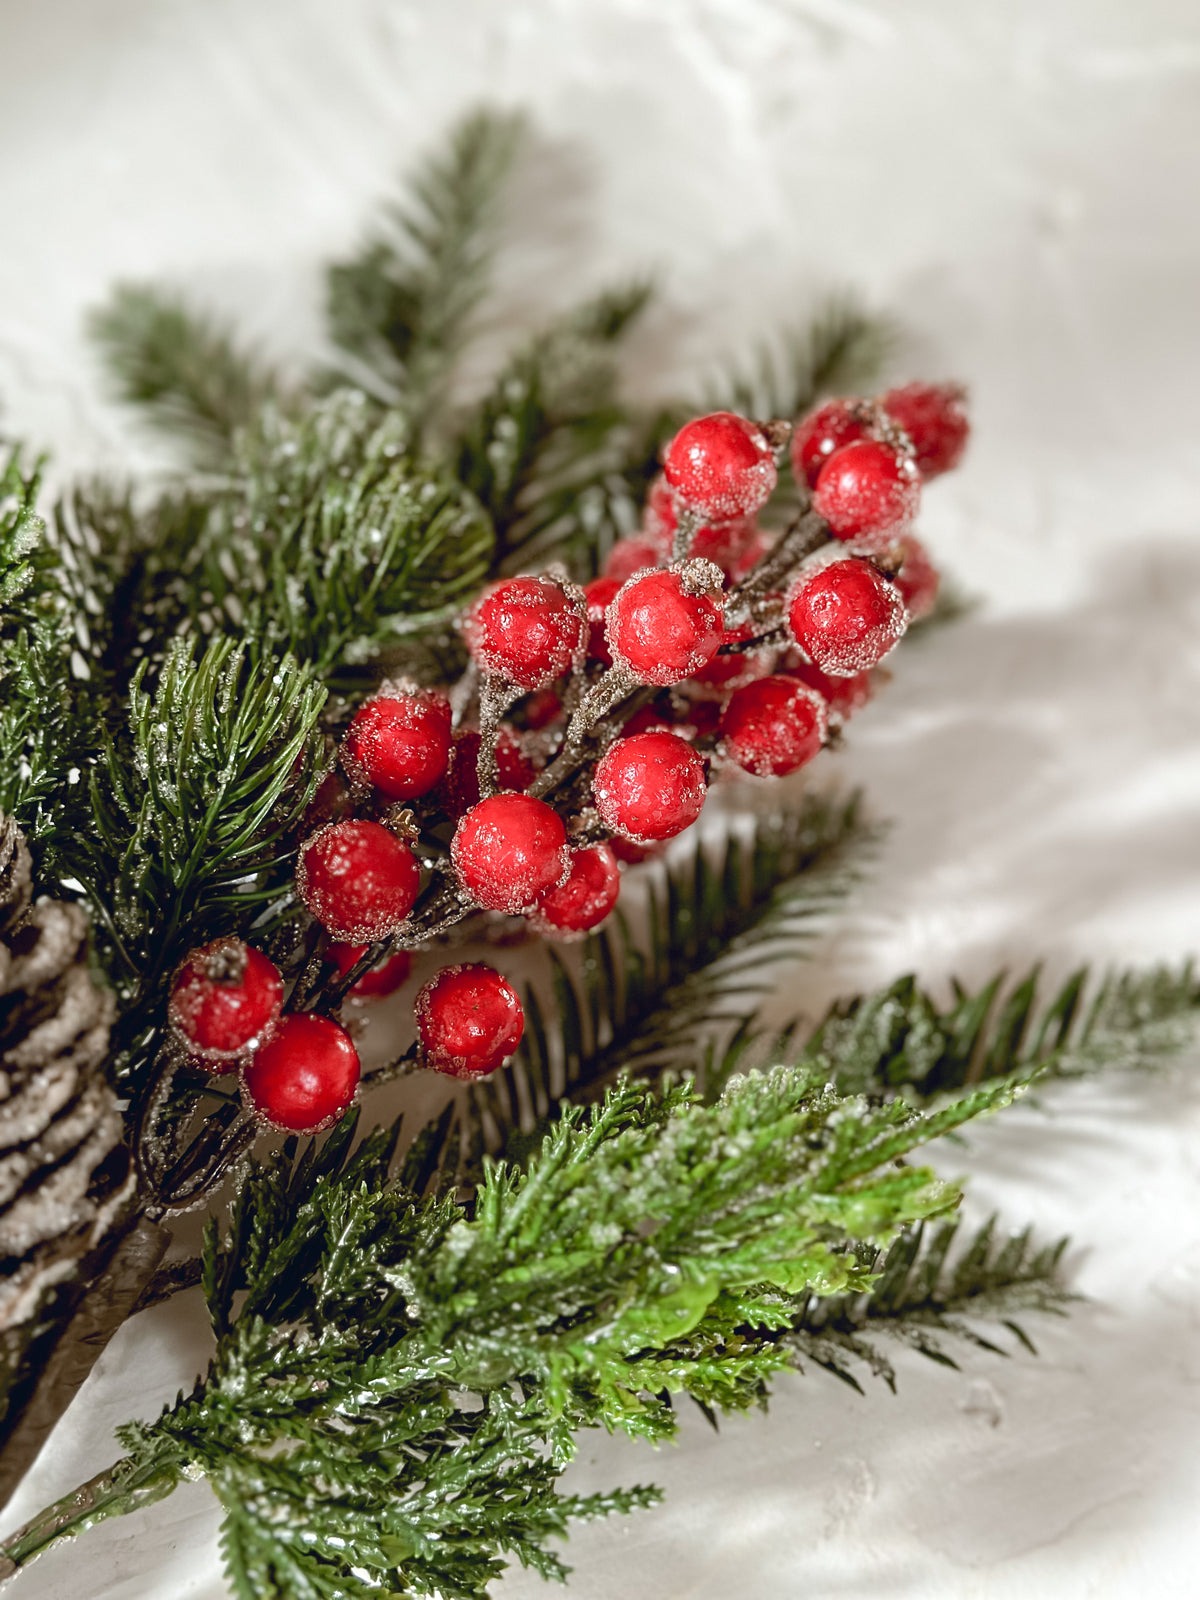 19'' Glittered Icy Mixed Pine Bundle with Red Berries